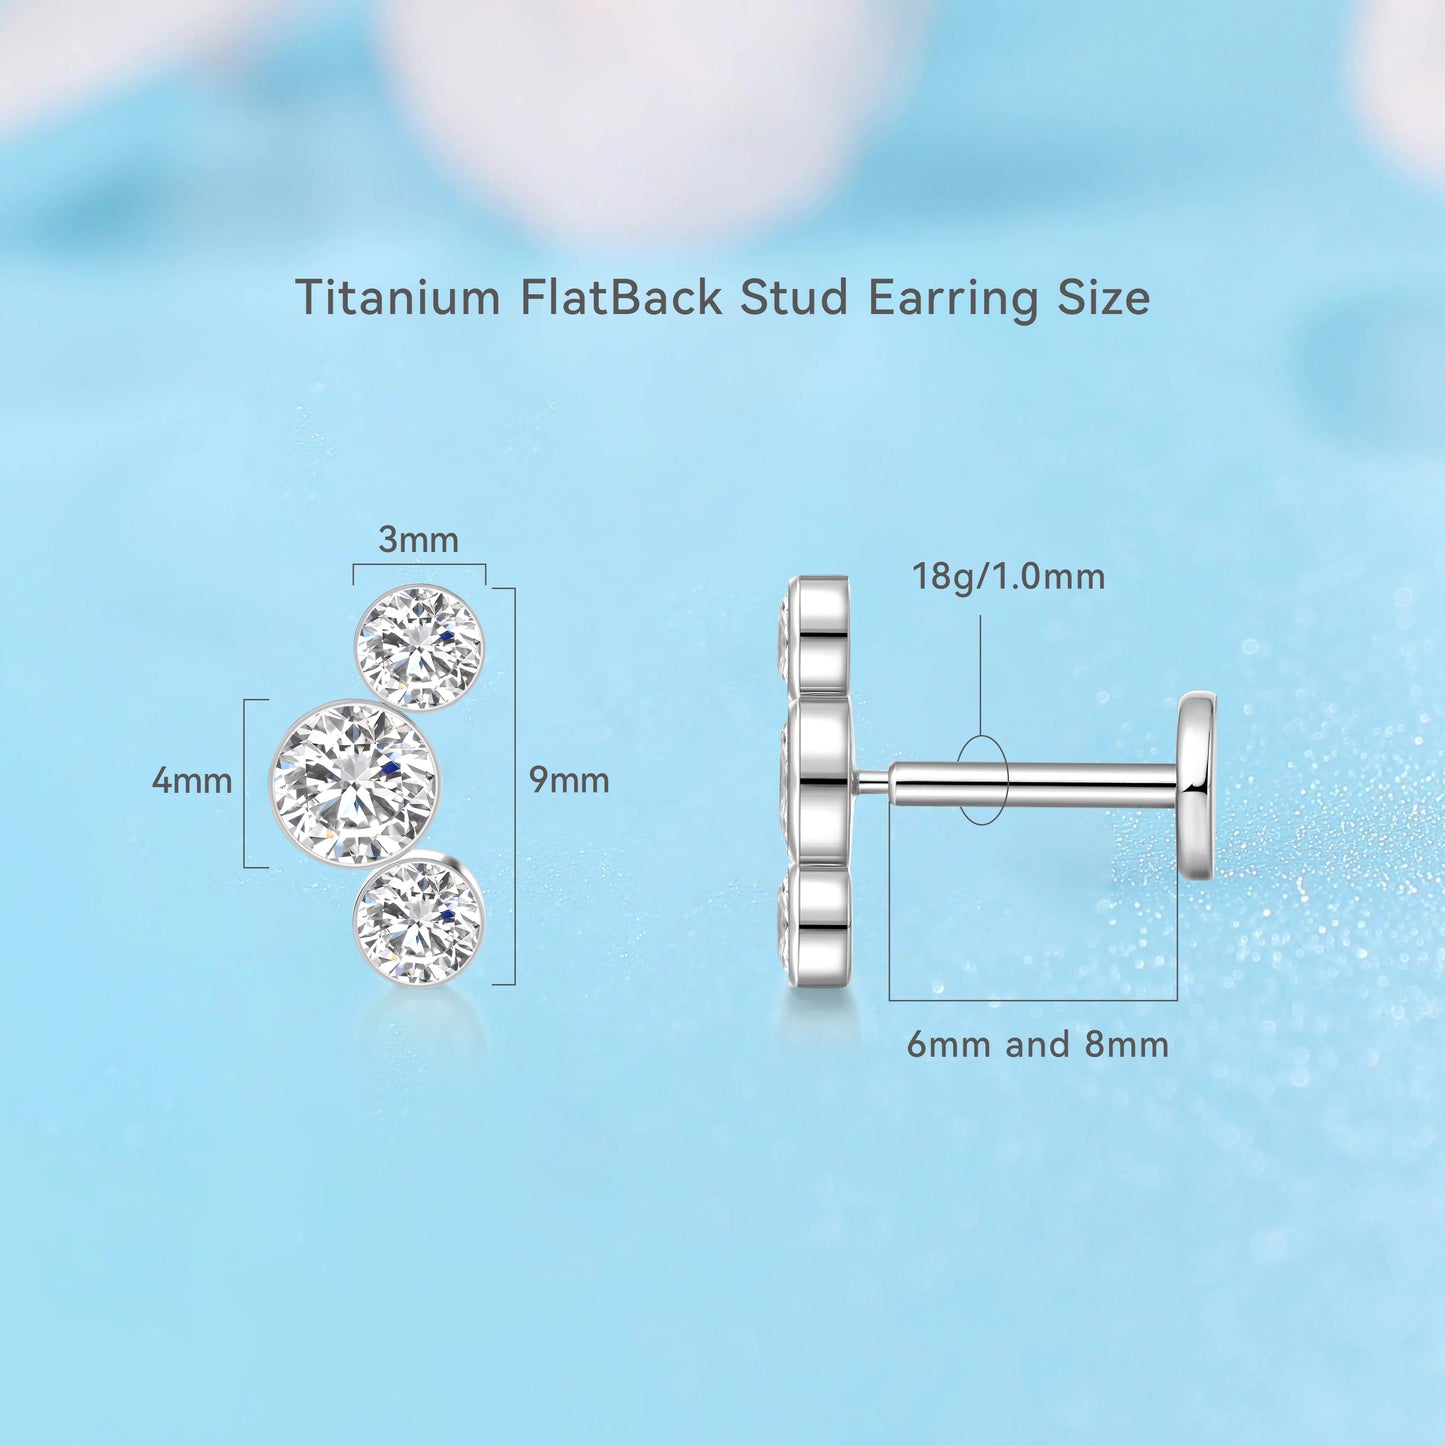 Limerencia G23 Hypoallergenic 18g Flat Back Stud Earrings | F136 Implant Grade Titanium Press Fit Threadless Push Pop in Cartilage Helix Labret Lip Monroe Tragus Piercing Studs- Three Crystal Cluster